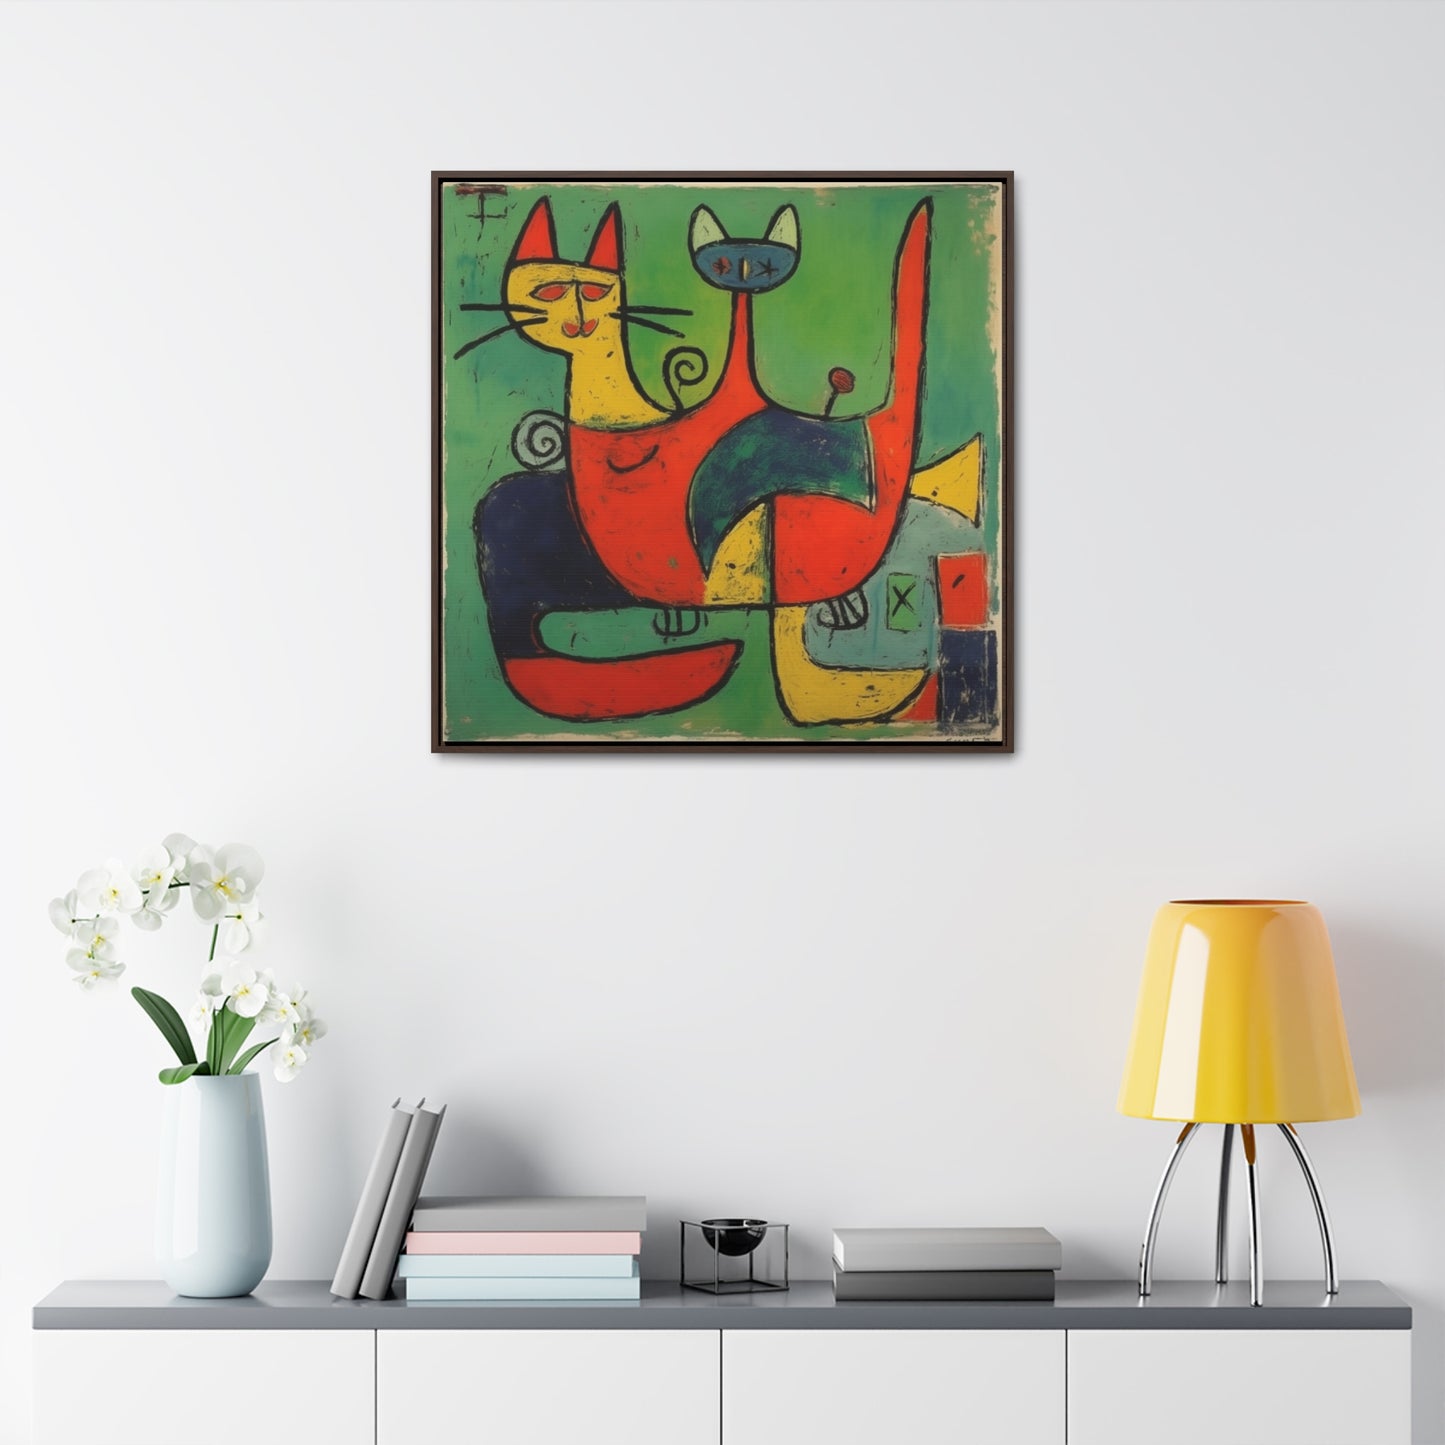 Cat 143, Gallery Canvas Wraps, Square Frame